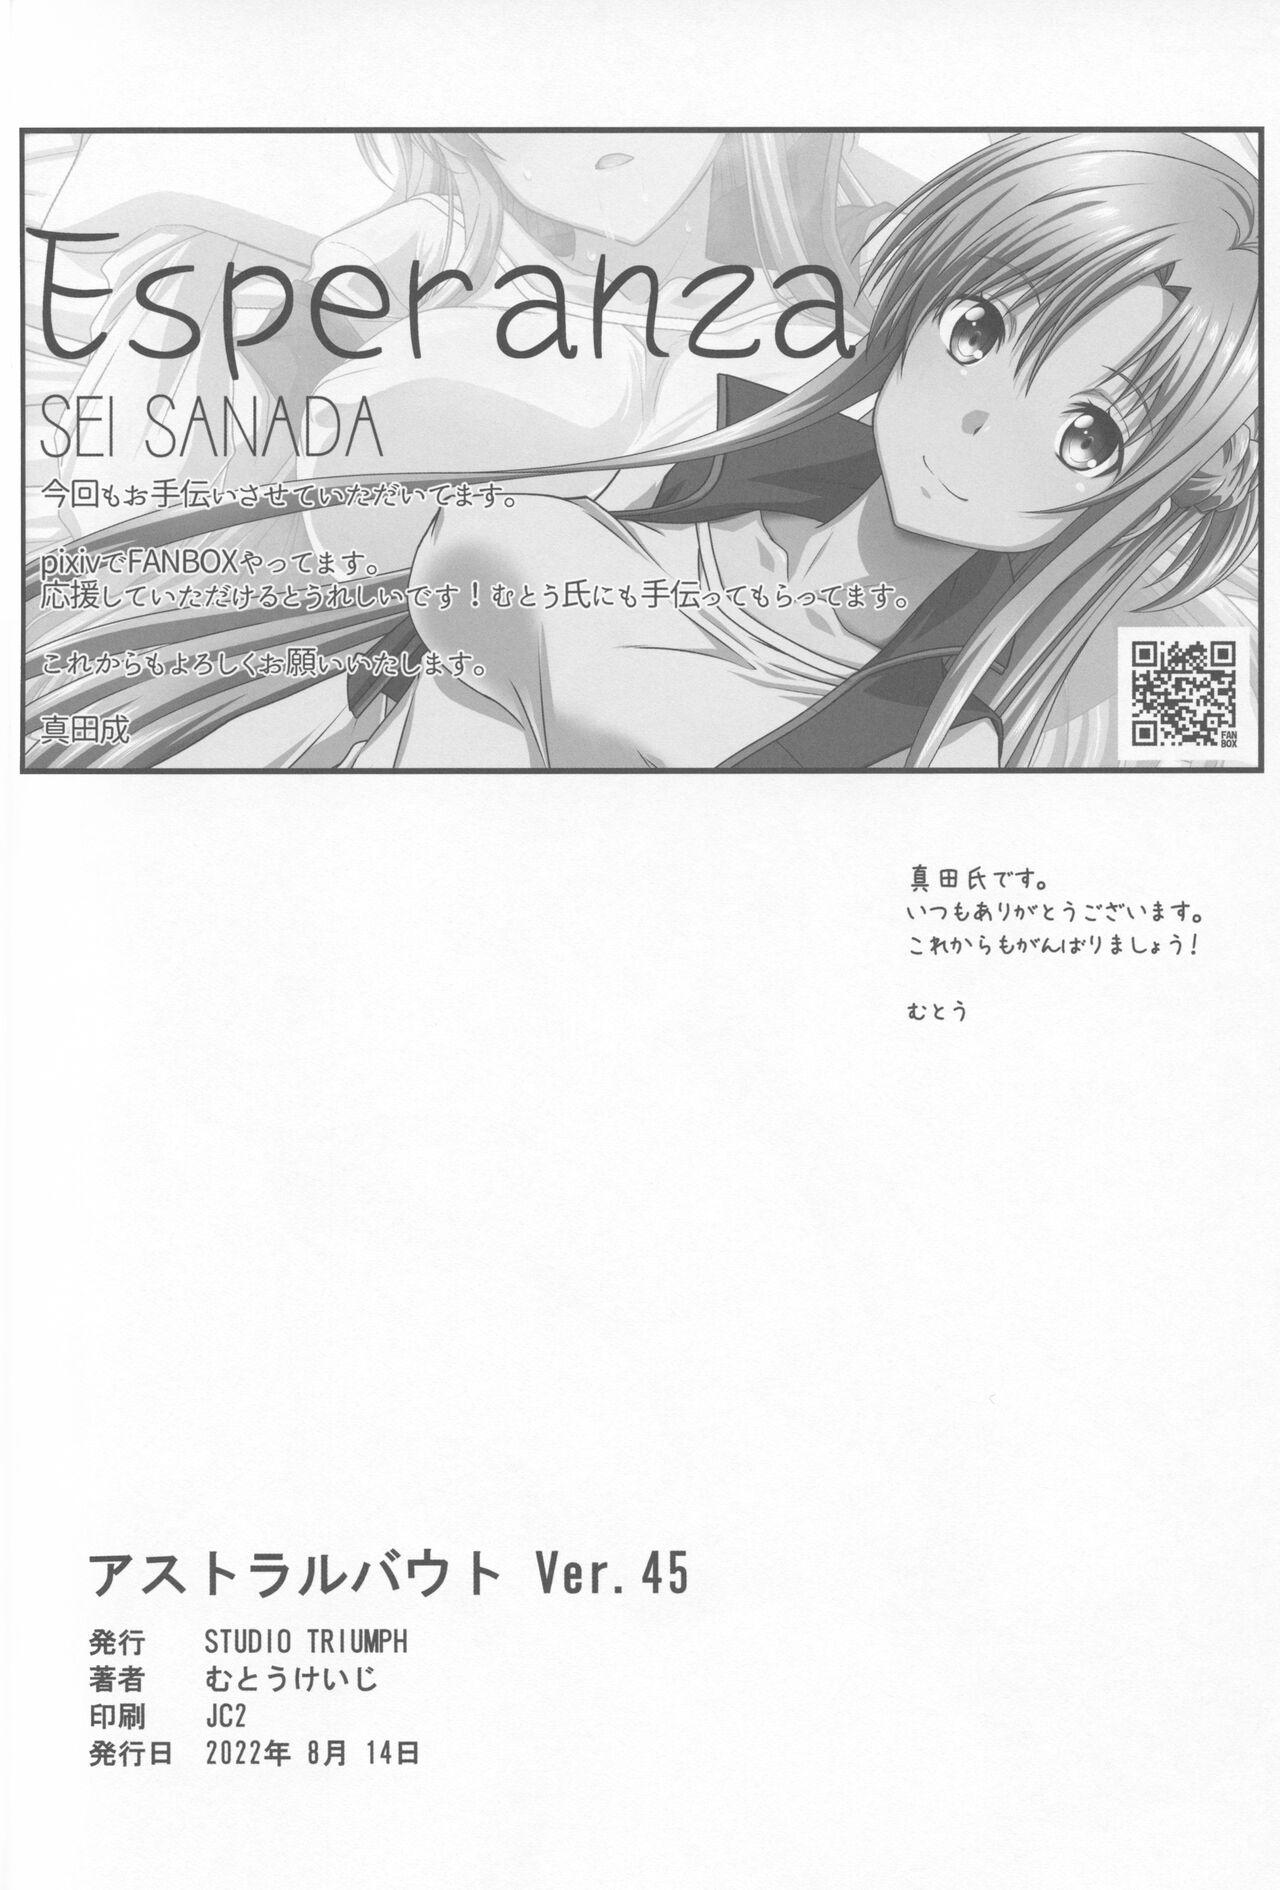 Vadia Astral Bout Ver. 45 - Sword art online Fetiche - Page 25